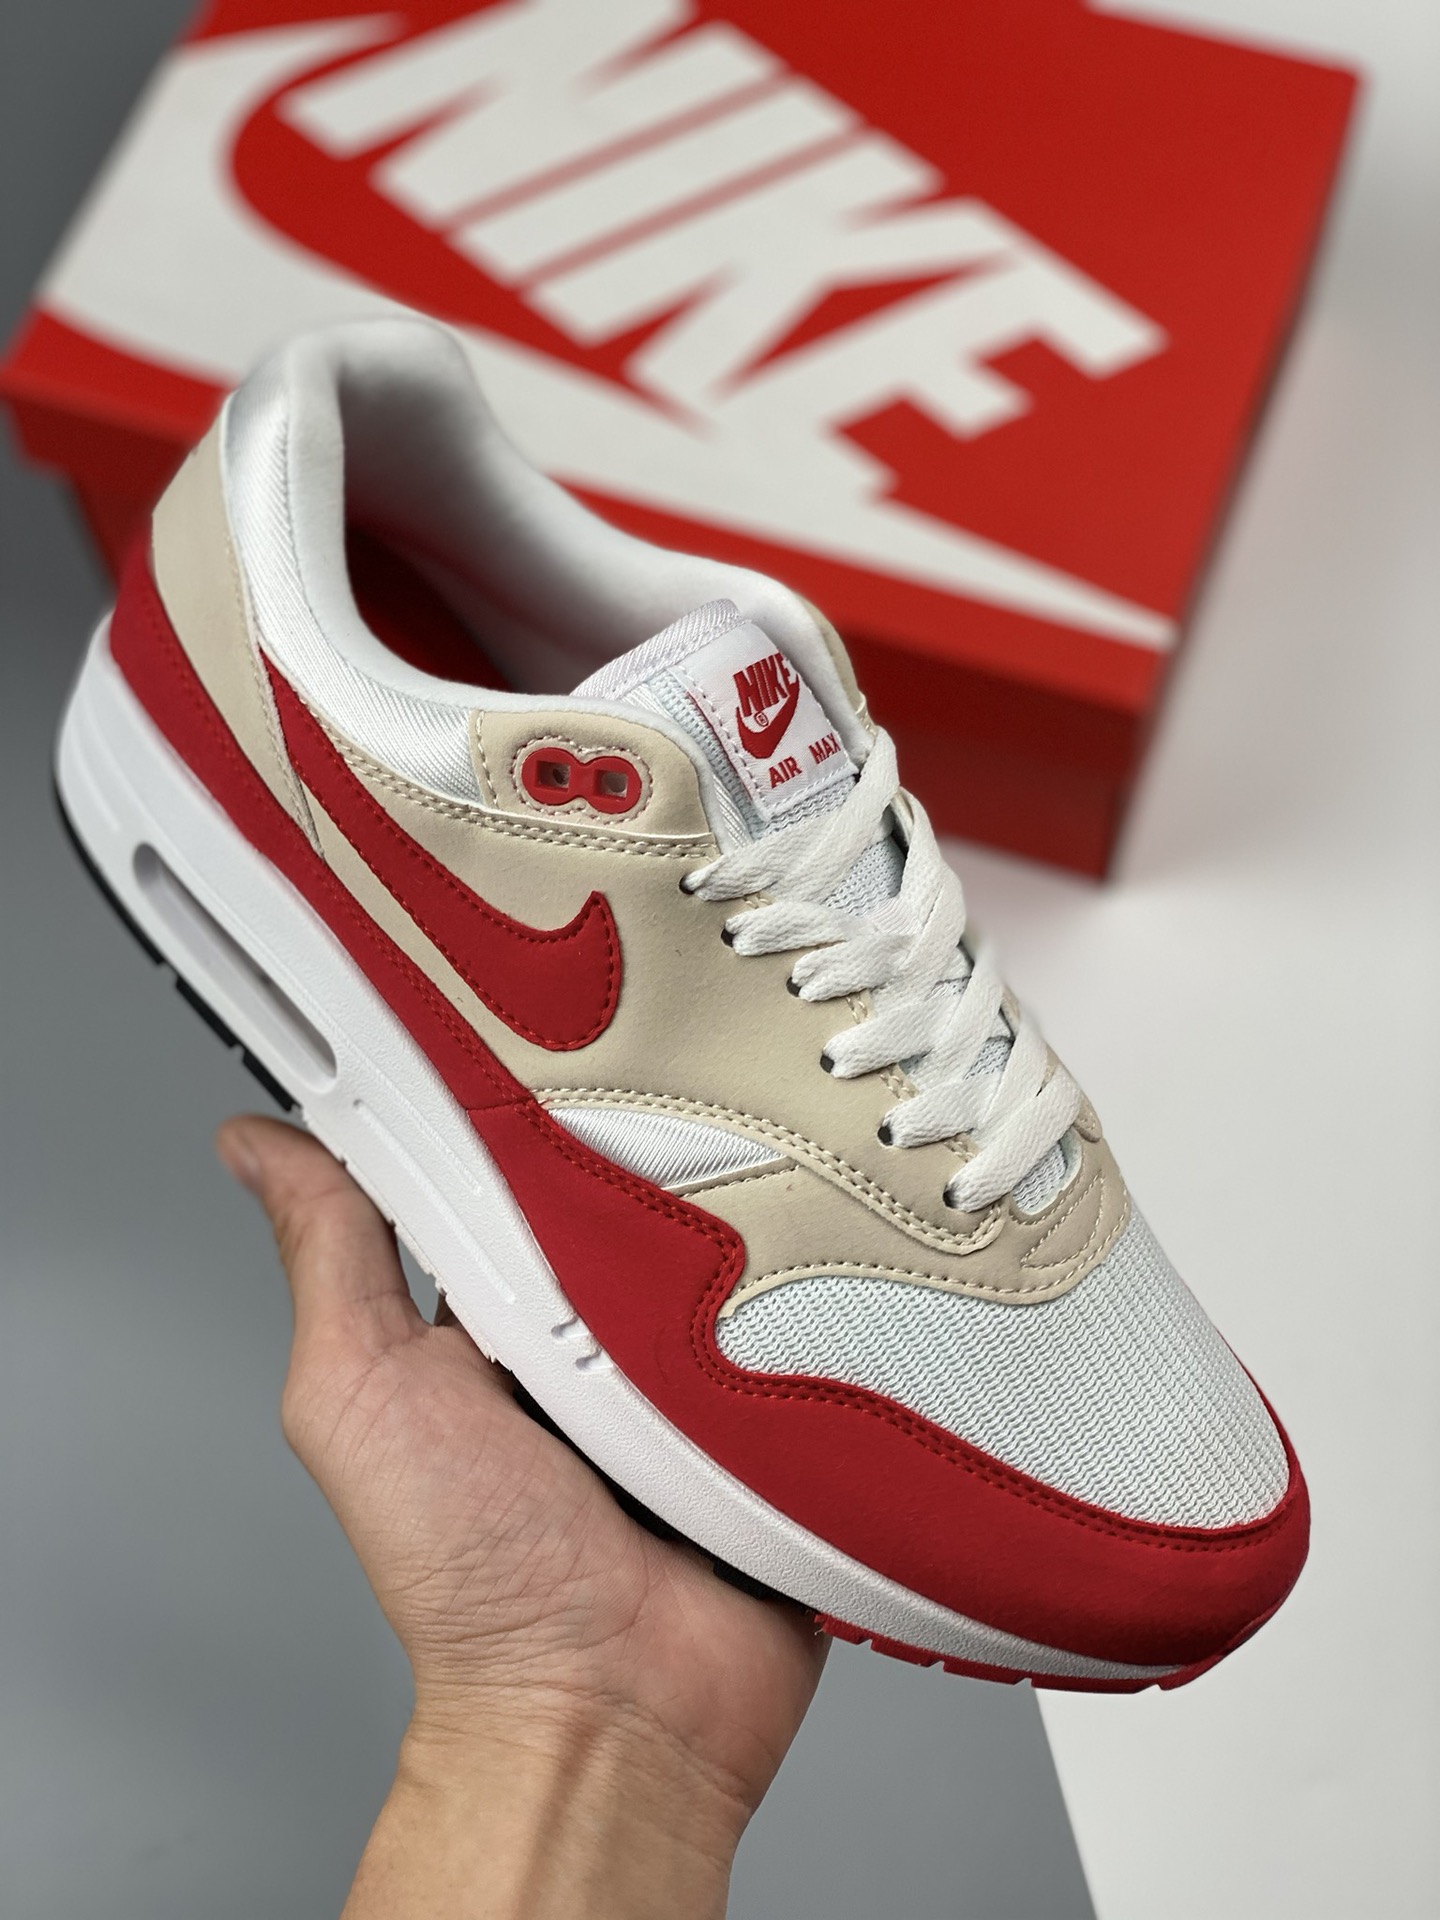 Nike Air Max 1 Anniversary White/University Red 908375-103 Shoes